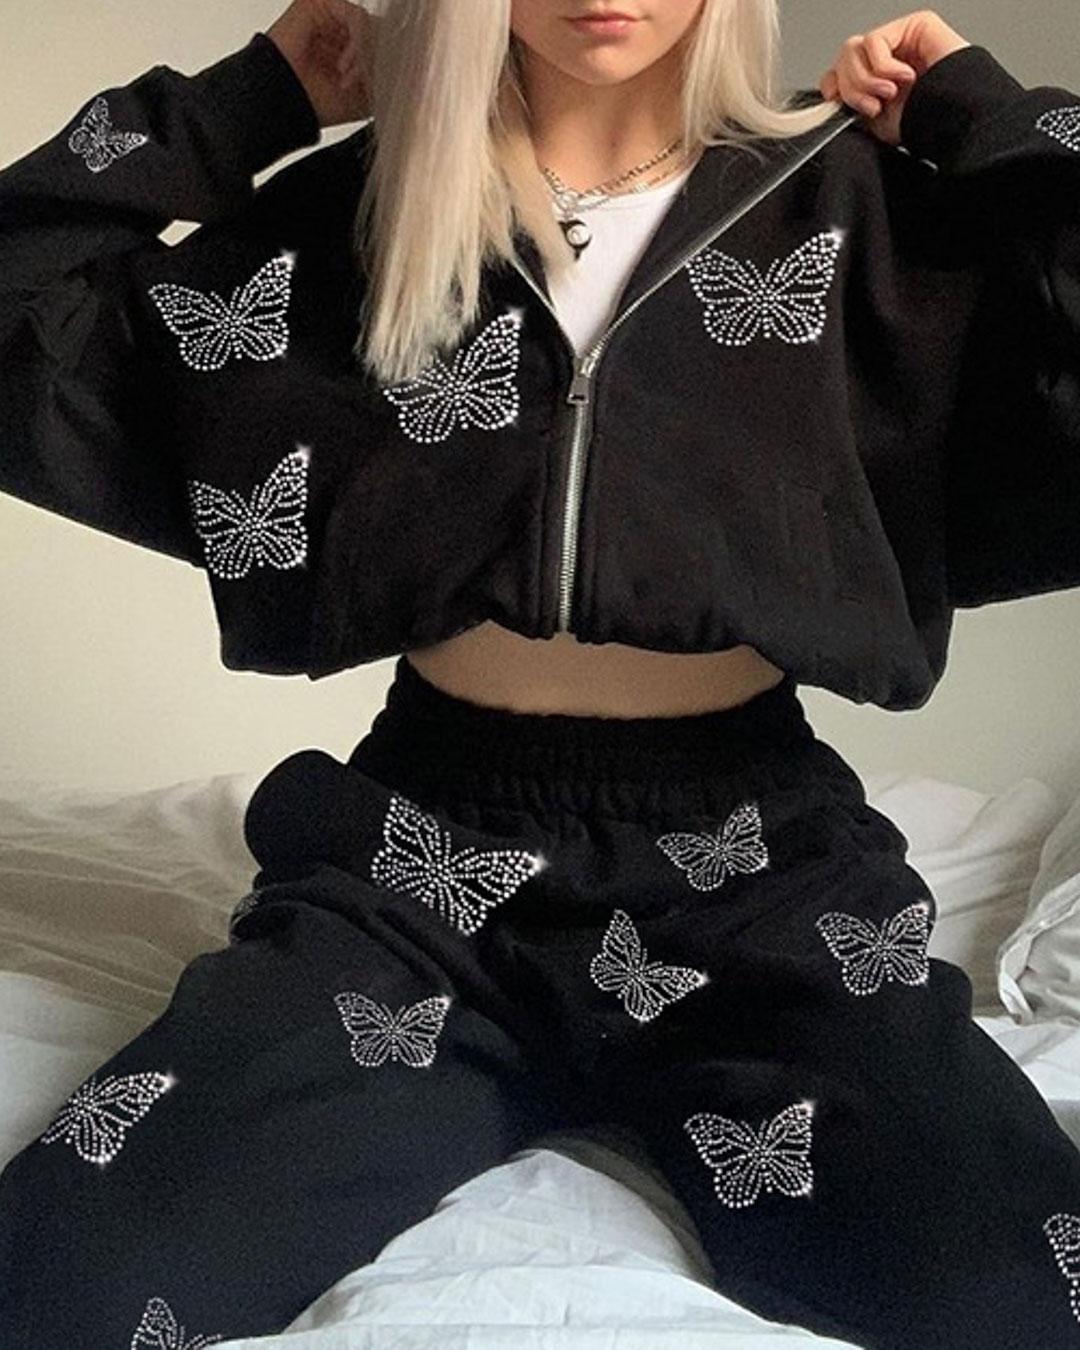 Butterfly Print Zip Up Hooded Tracksuit